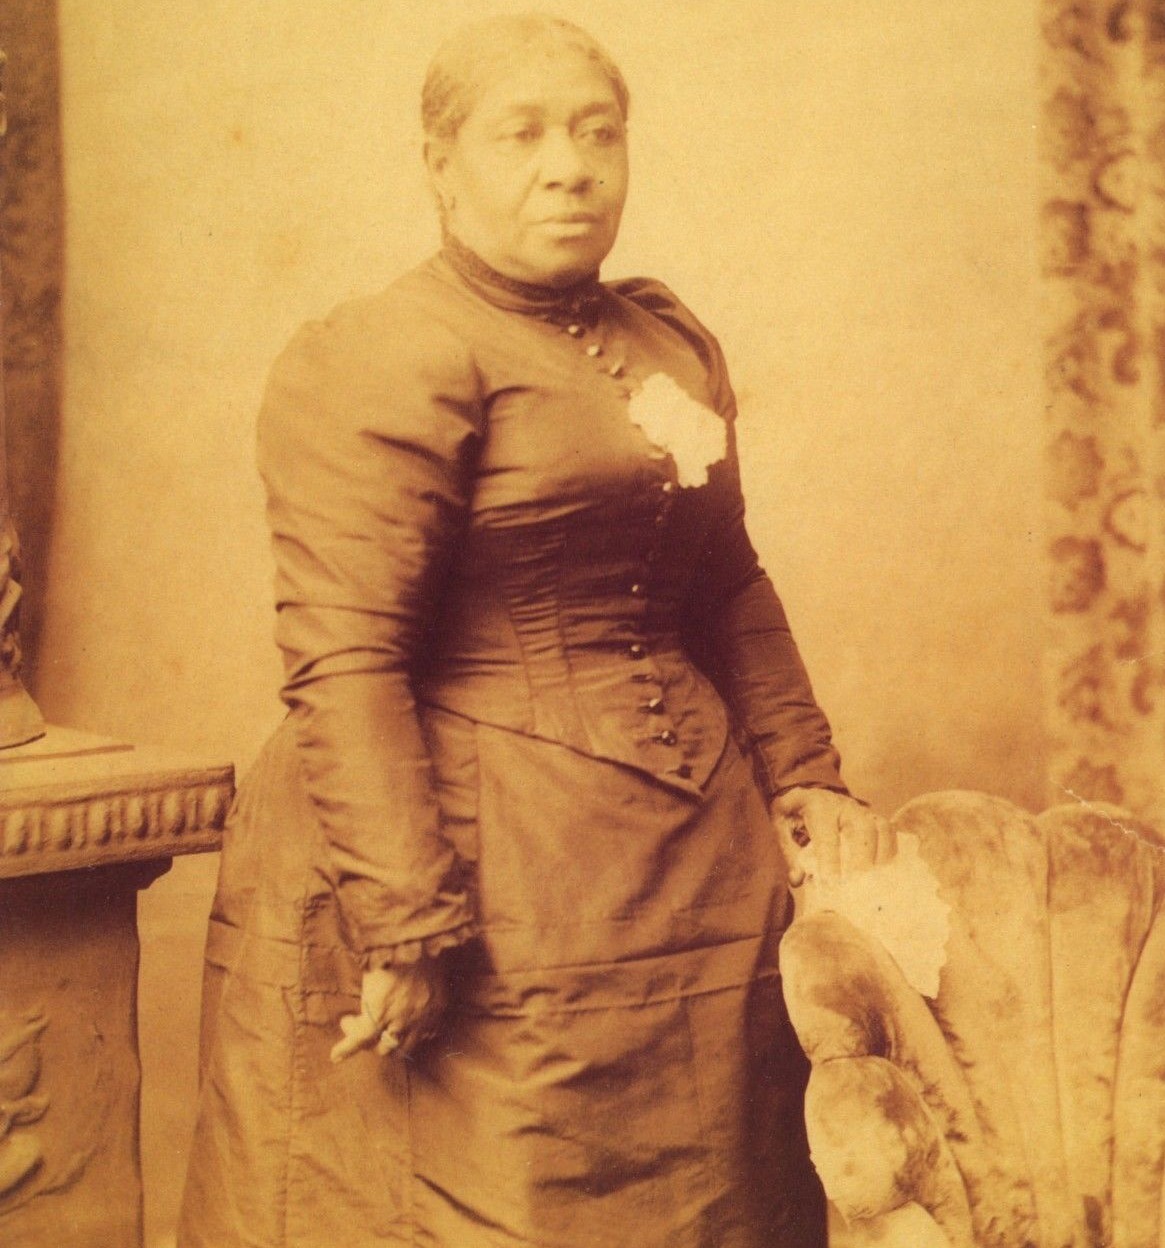 Emma J. Atkinson, c.1860s, Chicago
From BlackThen.com:
Emma J. Atkinson was a Black abolitionist who was one of the mysterious “Big Four,” a group of women at Quinn Chapel who provided aid to runaway slaves.
Atkinson arrived in Chicago around 1847...